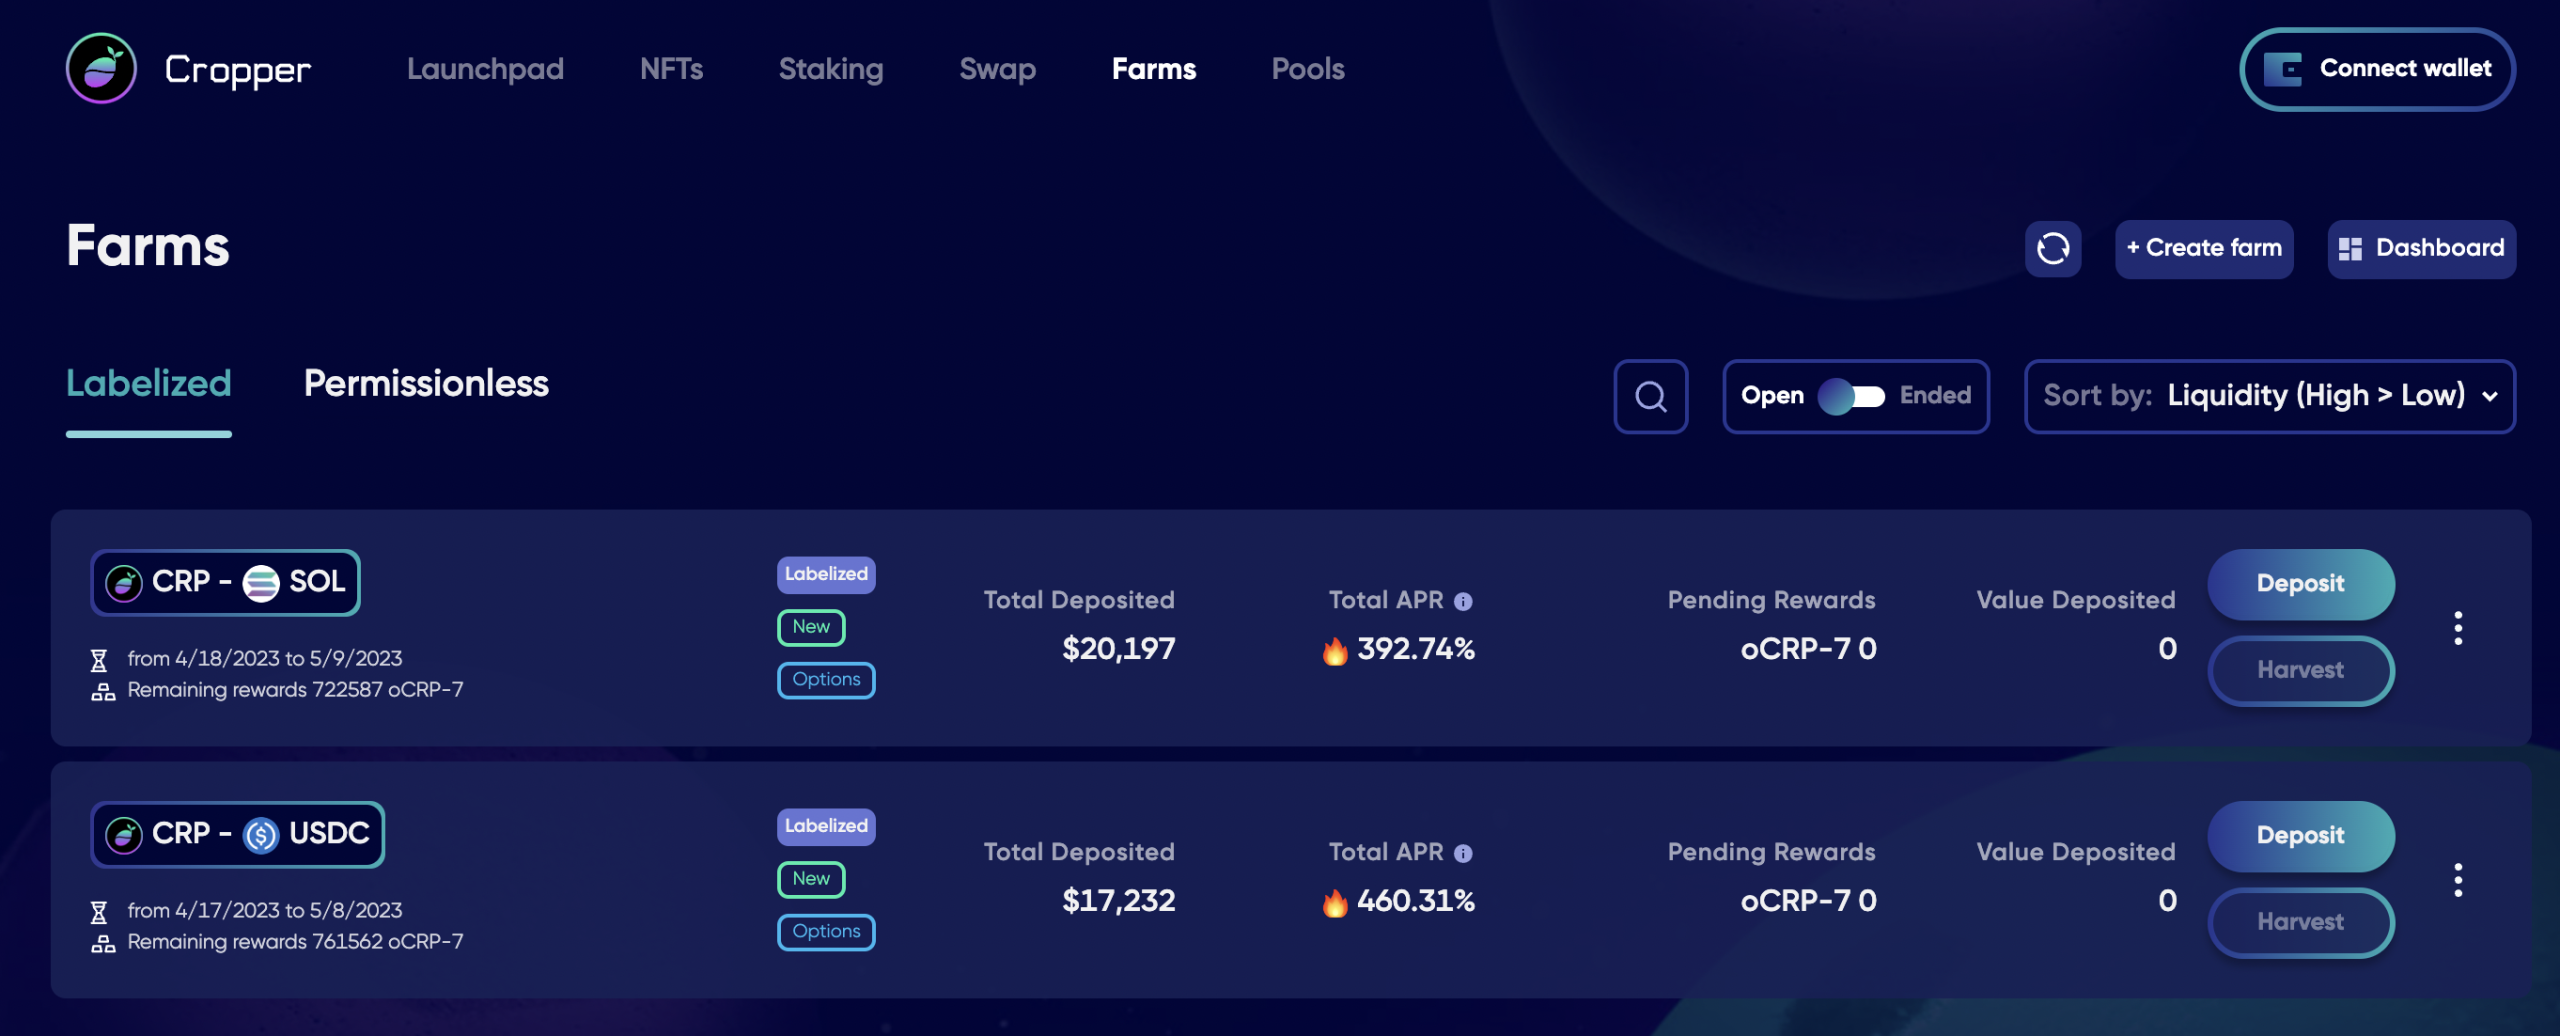 CropperFinance review